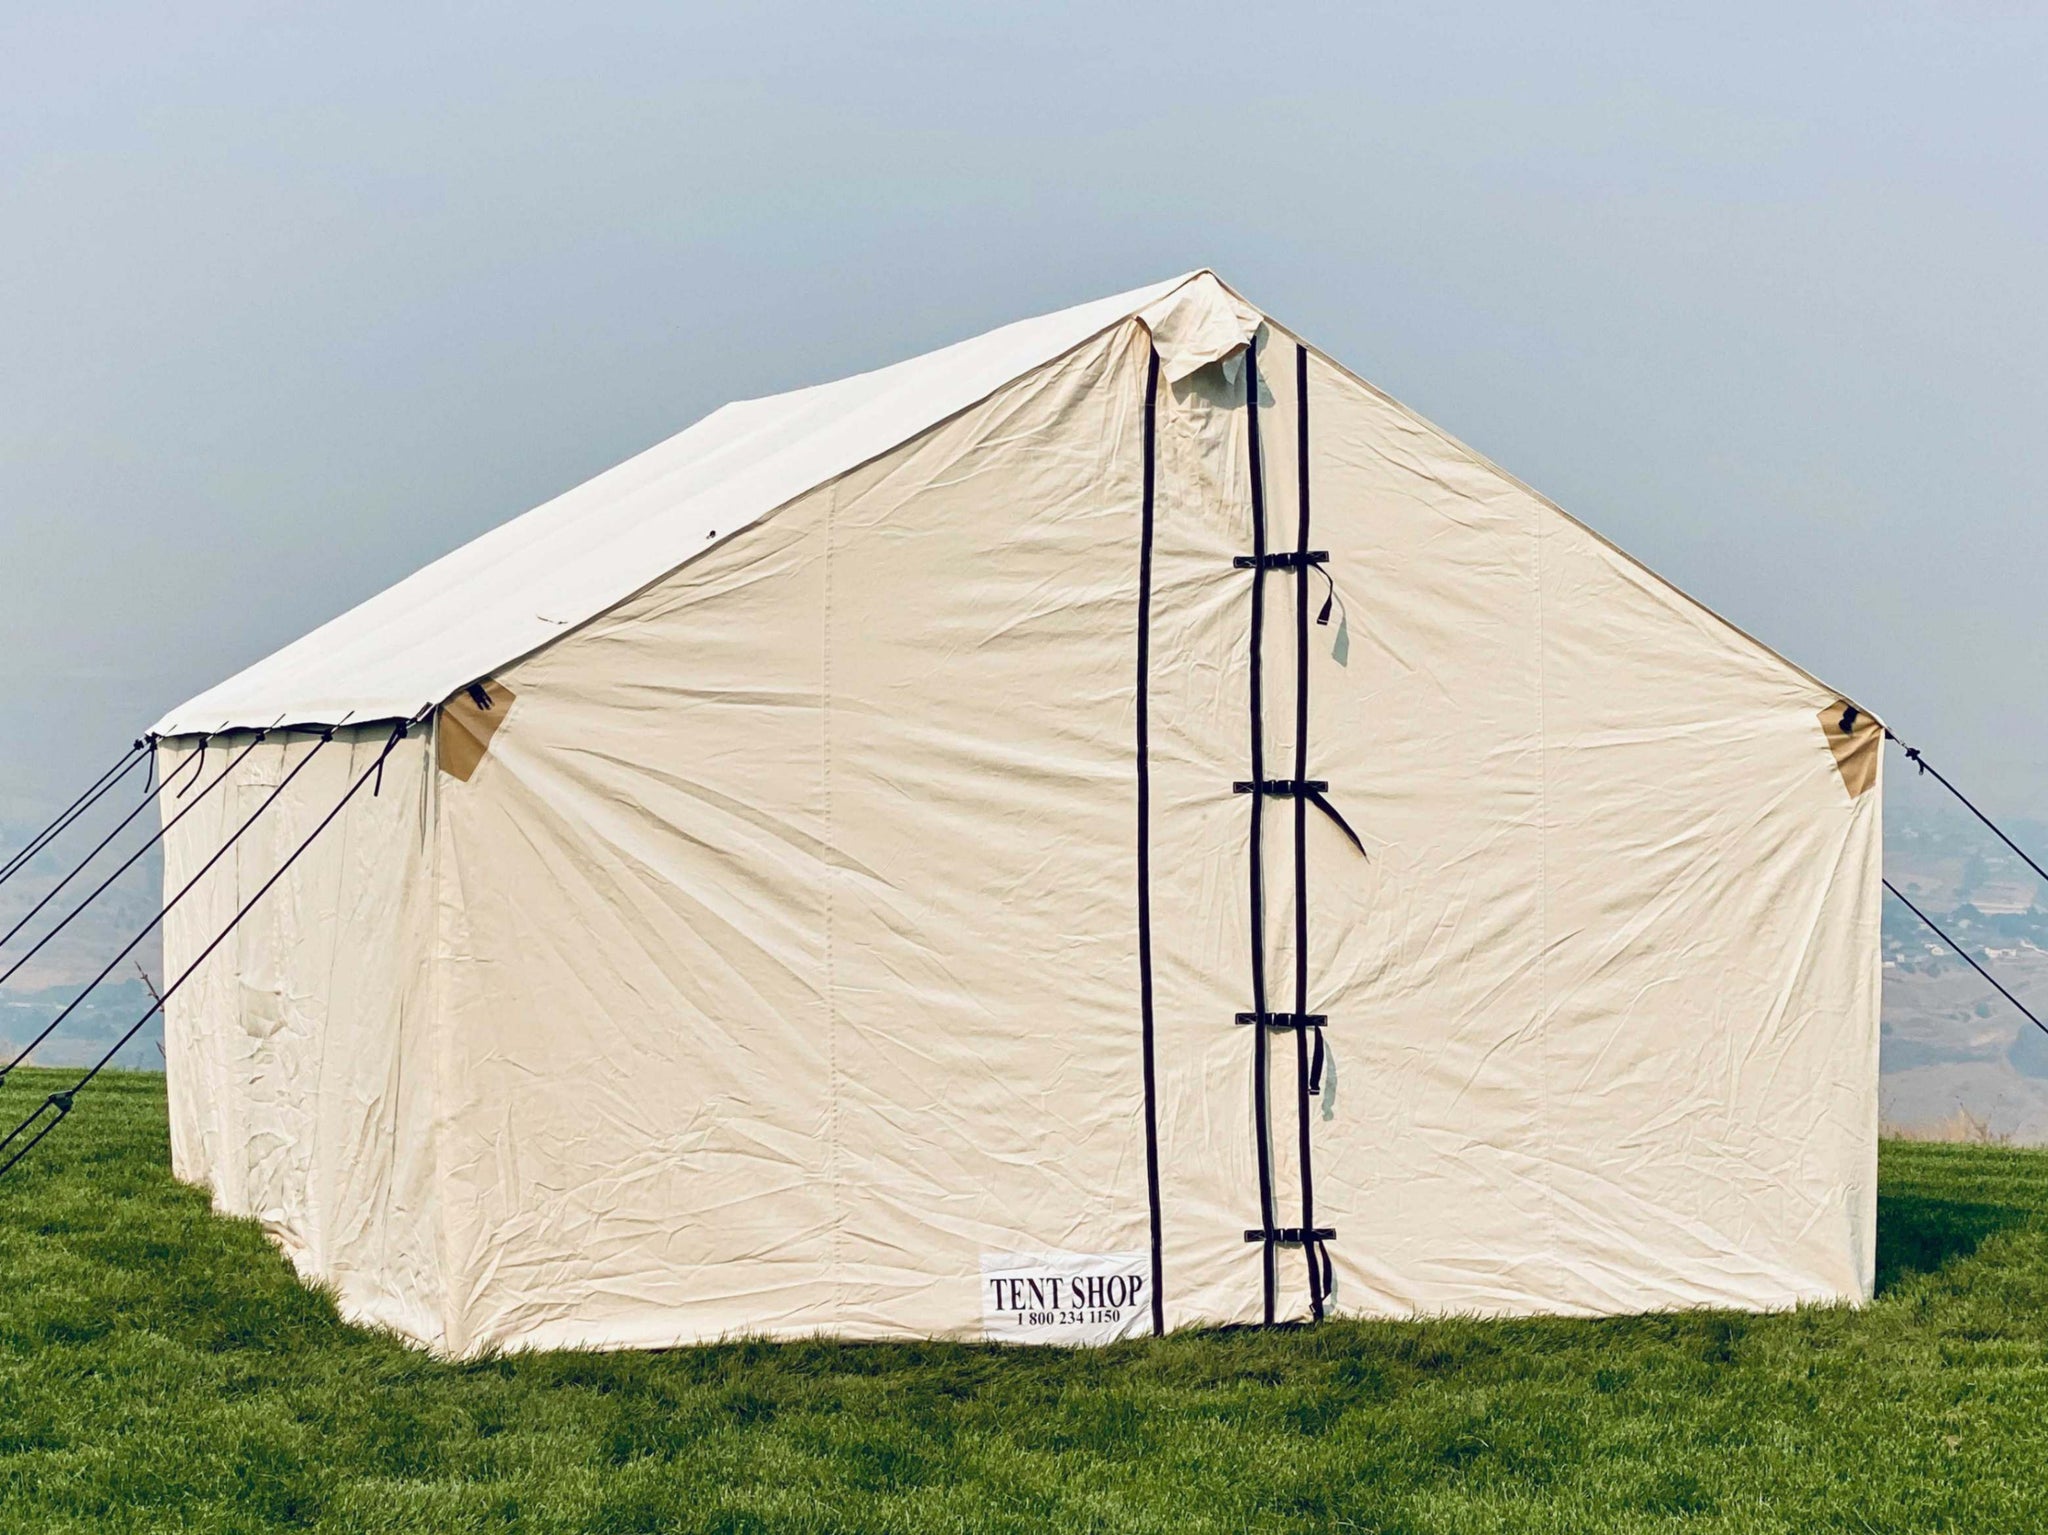 Wilderness Wall Tent Shop Canvas Tent For Sale with Angle Kit to make frame